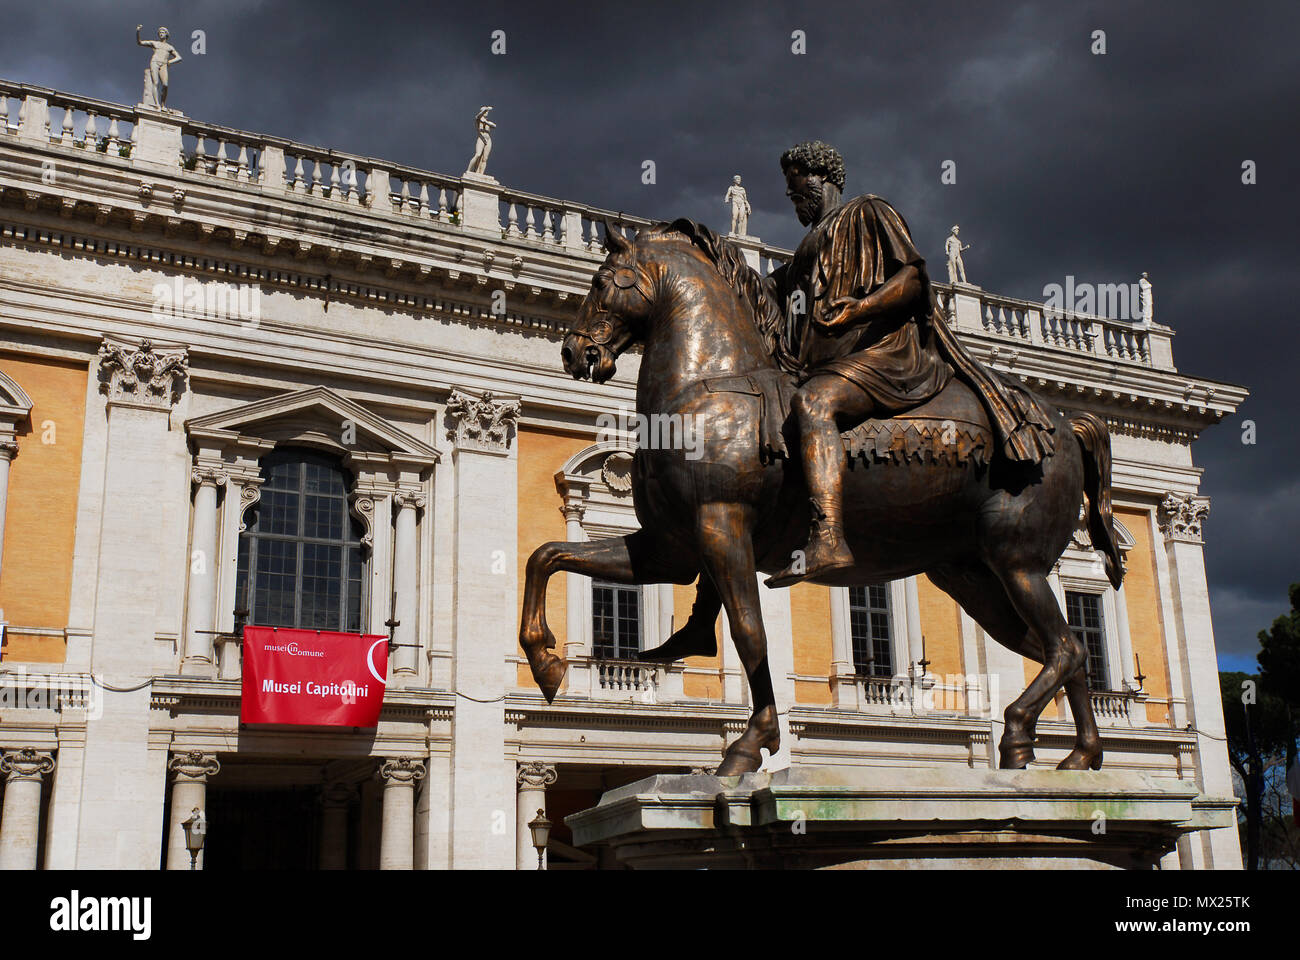 Capitoline Museums in the center of Rome, the most ancient public museum in the world, with the equestrian statue of roman emperor Marcus Aurelius and Stock Photo